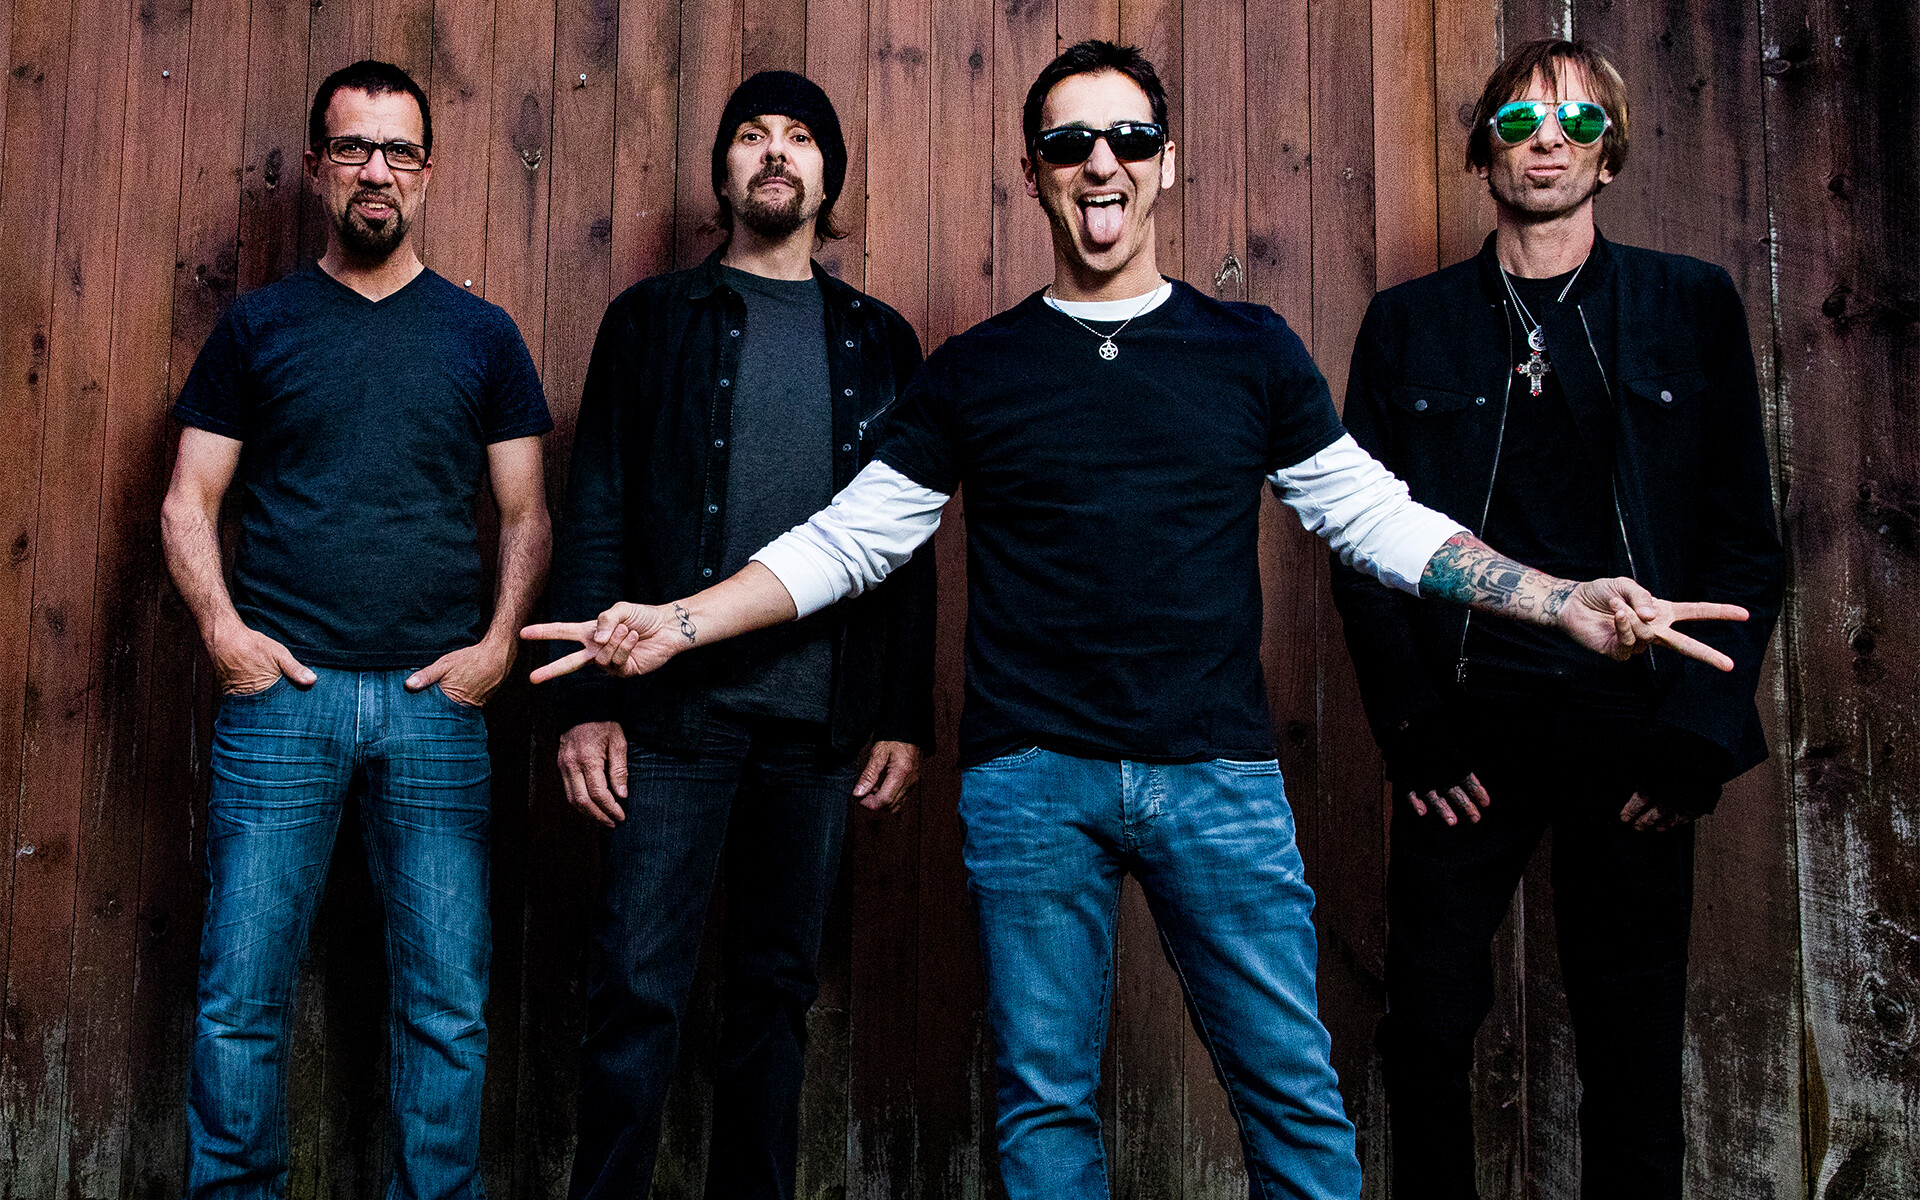 Godsmack: An American rock band from Lawrence, Massachusetts, formed in 1995, Sully Erna, Robbie Merrill. 1920x1200 HD Wallpaper.